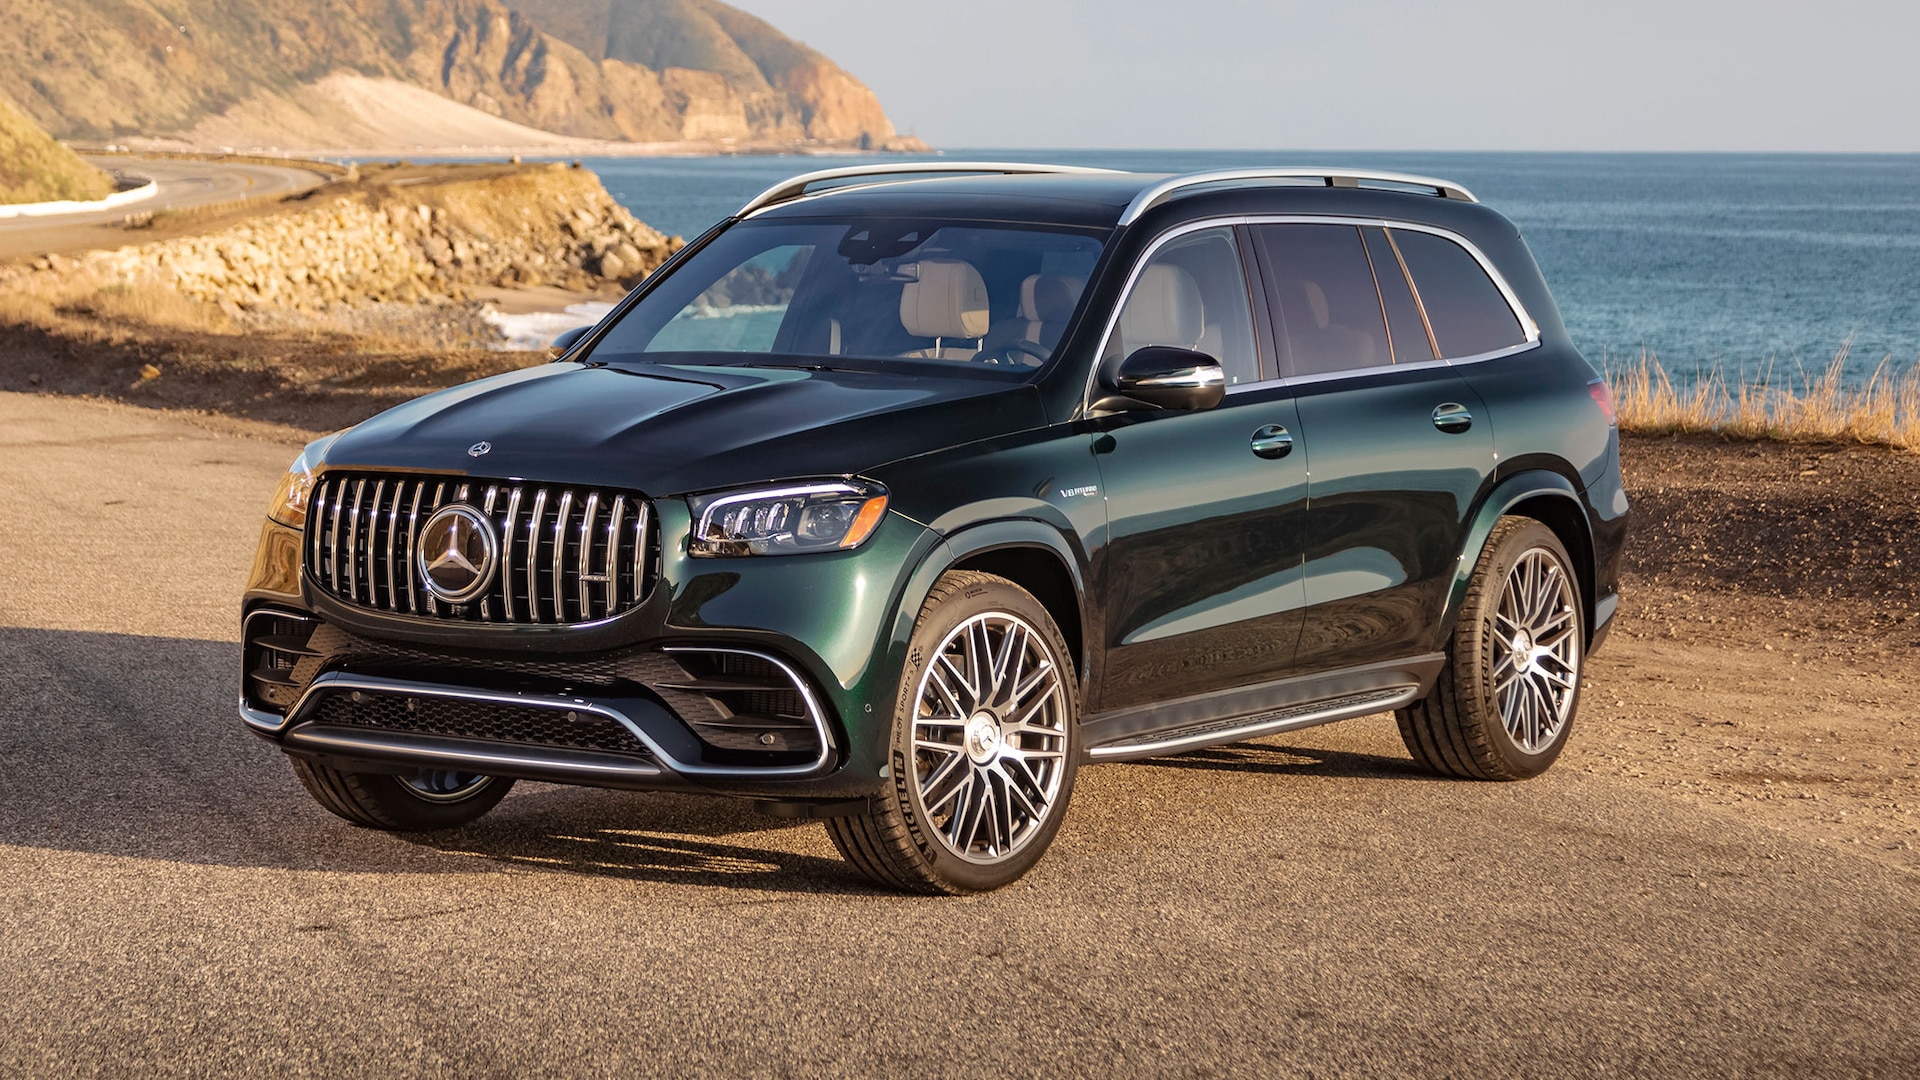 2021 Mercedes-AMG GLS63 First Test: Big, Bold, and Unrepentantly Quick